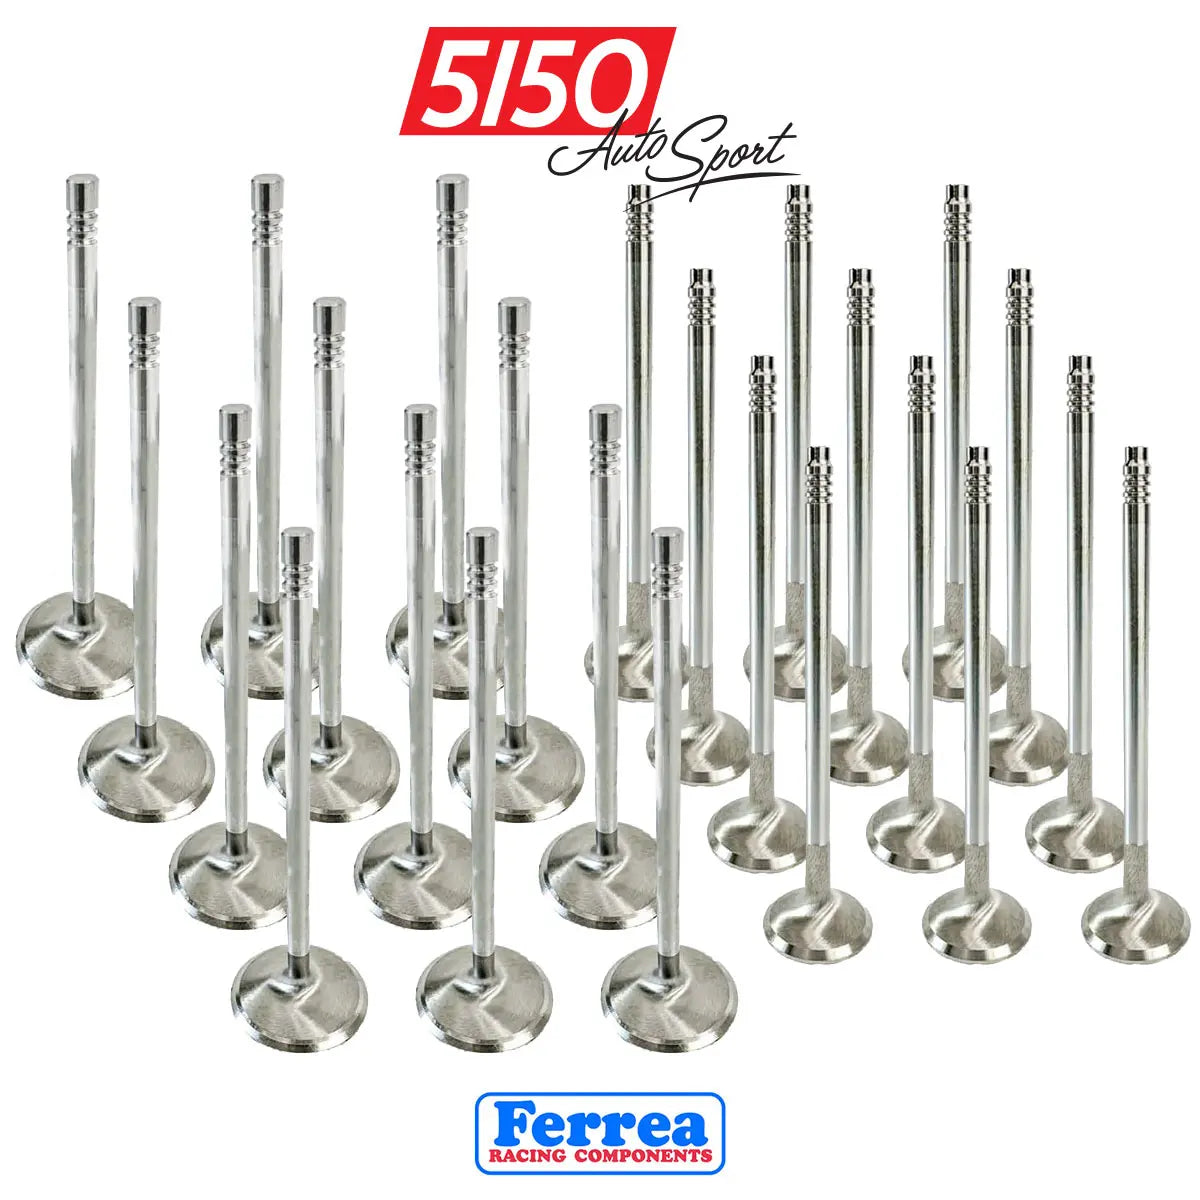 Ferrea High Performance Valves for Racing Cylinder Heads BMW N55 S55 Engines